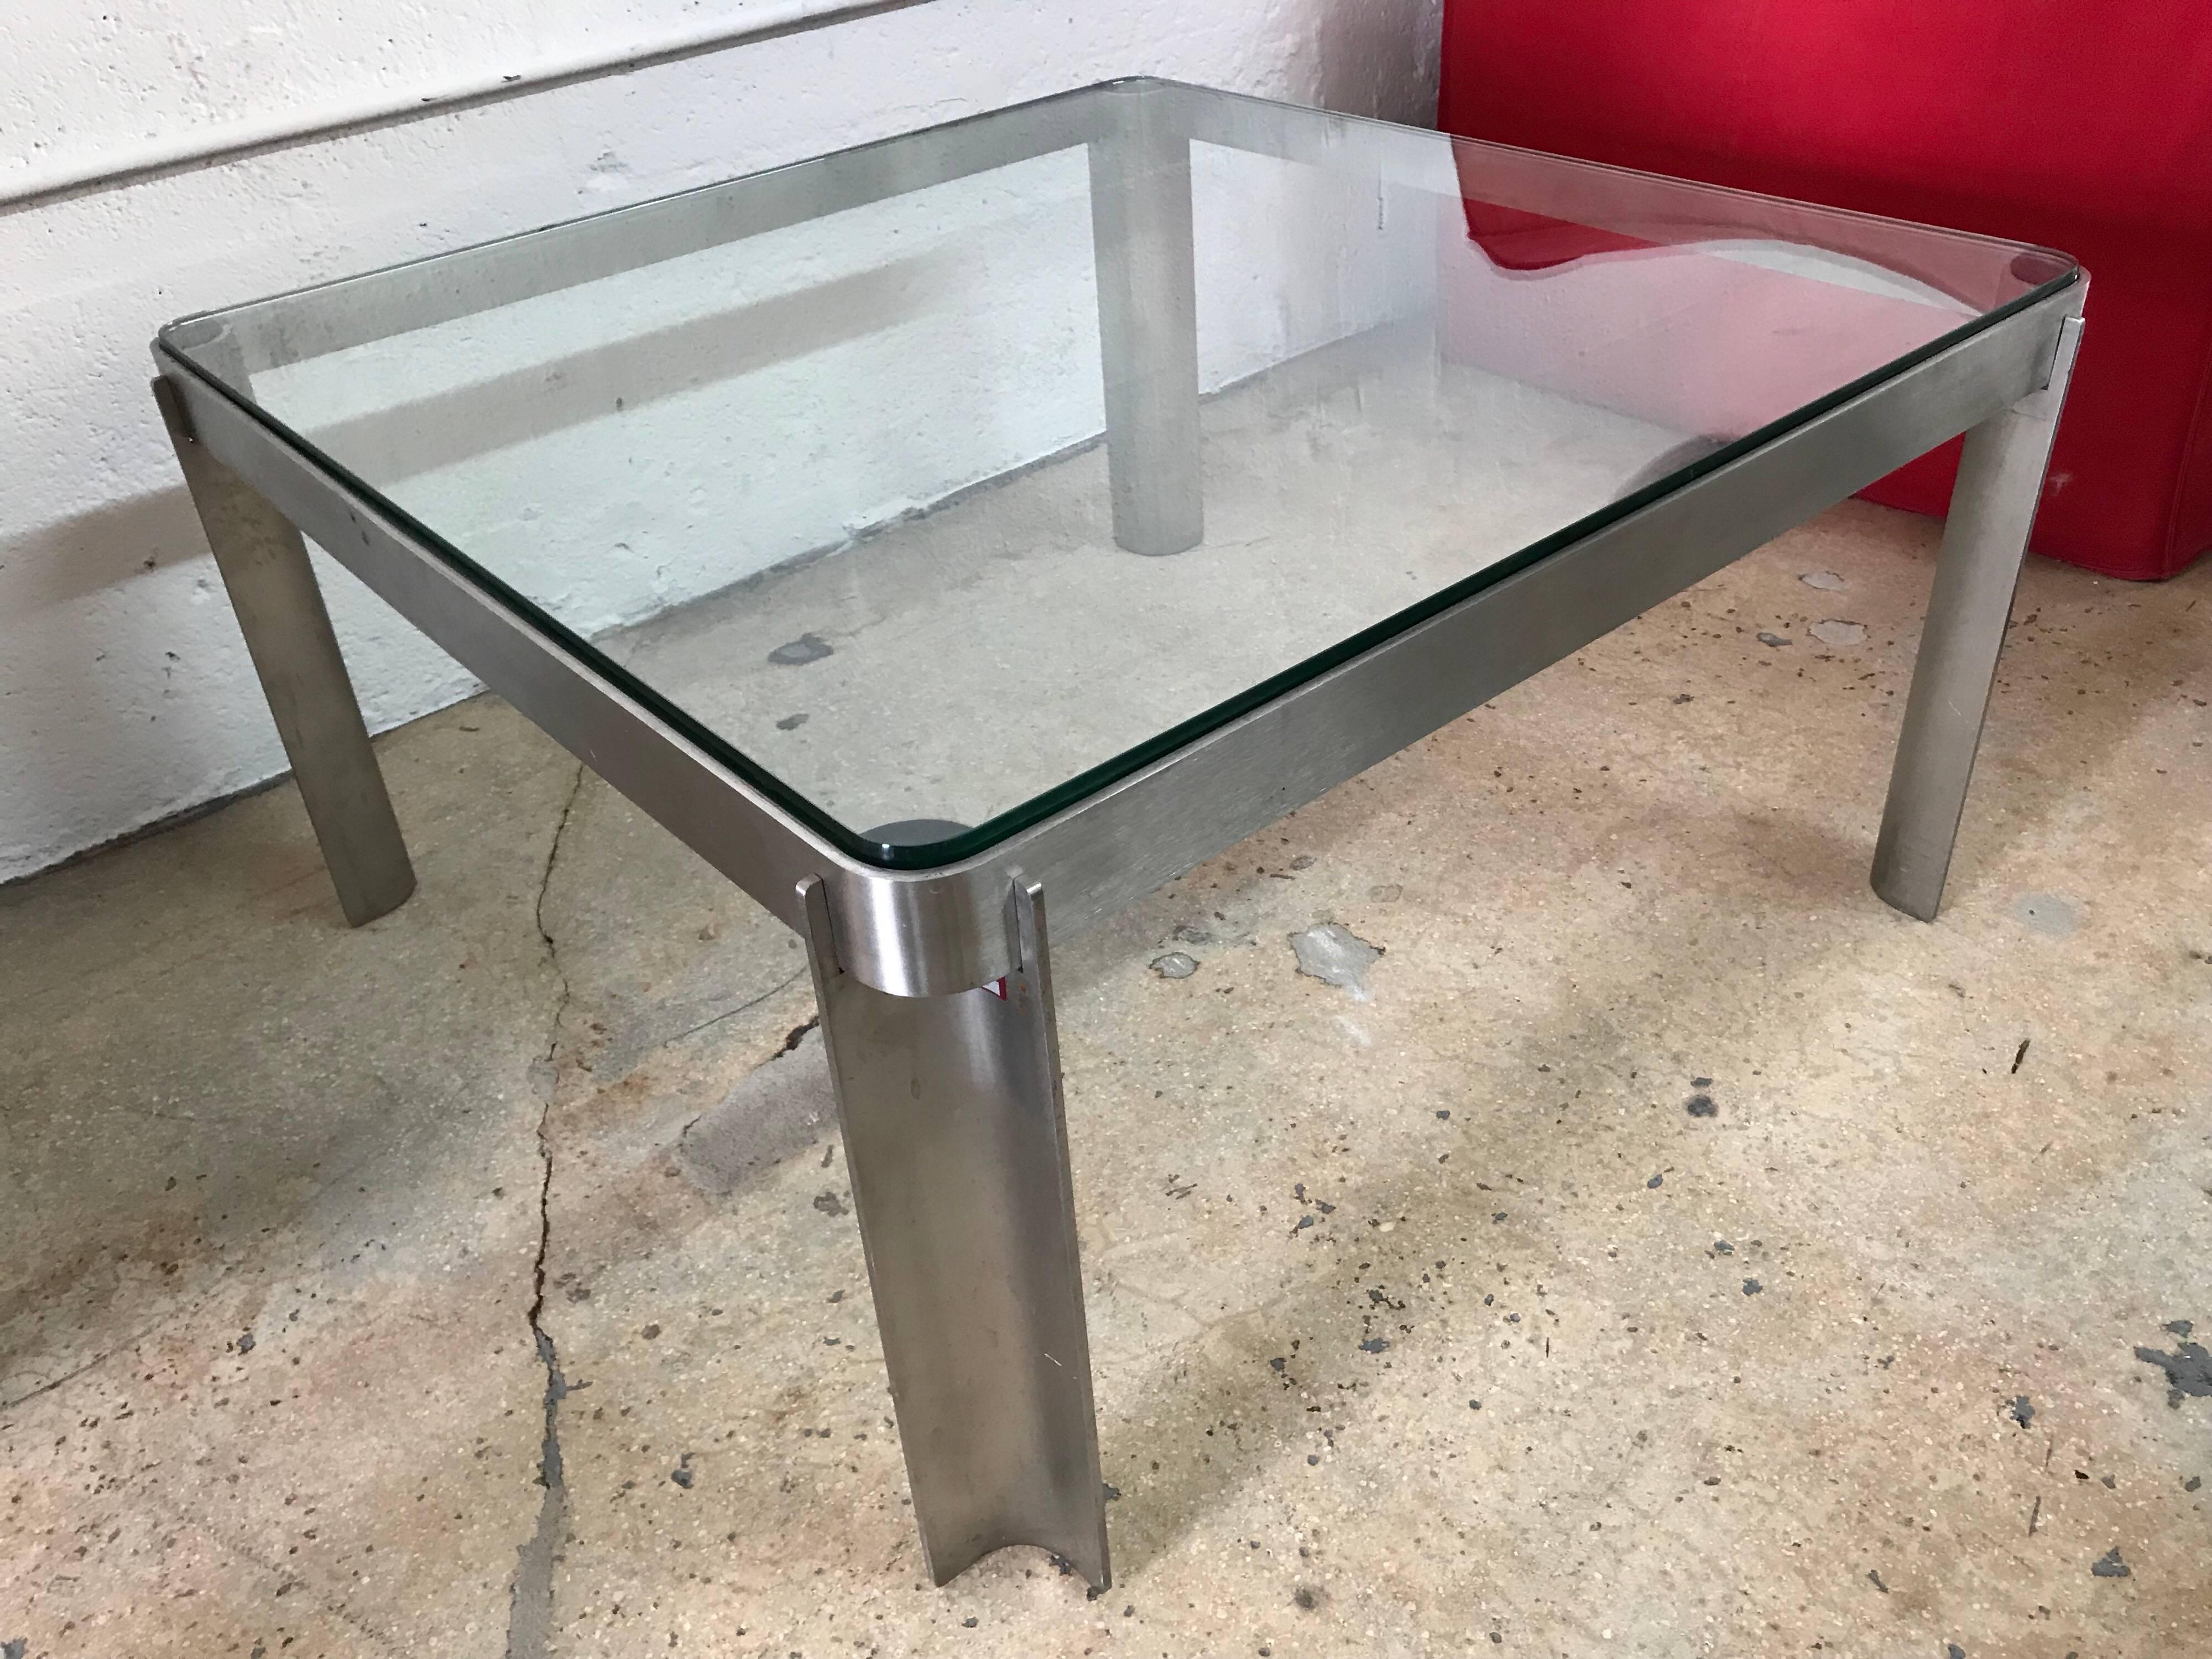 Postmodern coffee or cocktail table rendered in a simple steel frame with a glass top, Italy, circa 1980s.